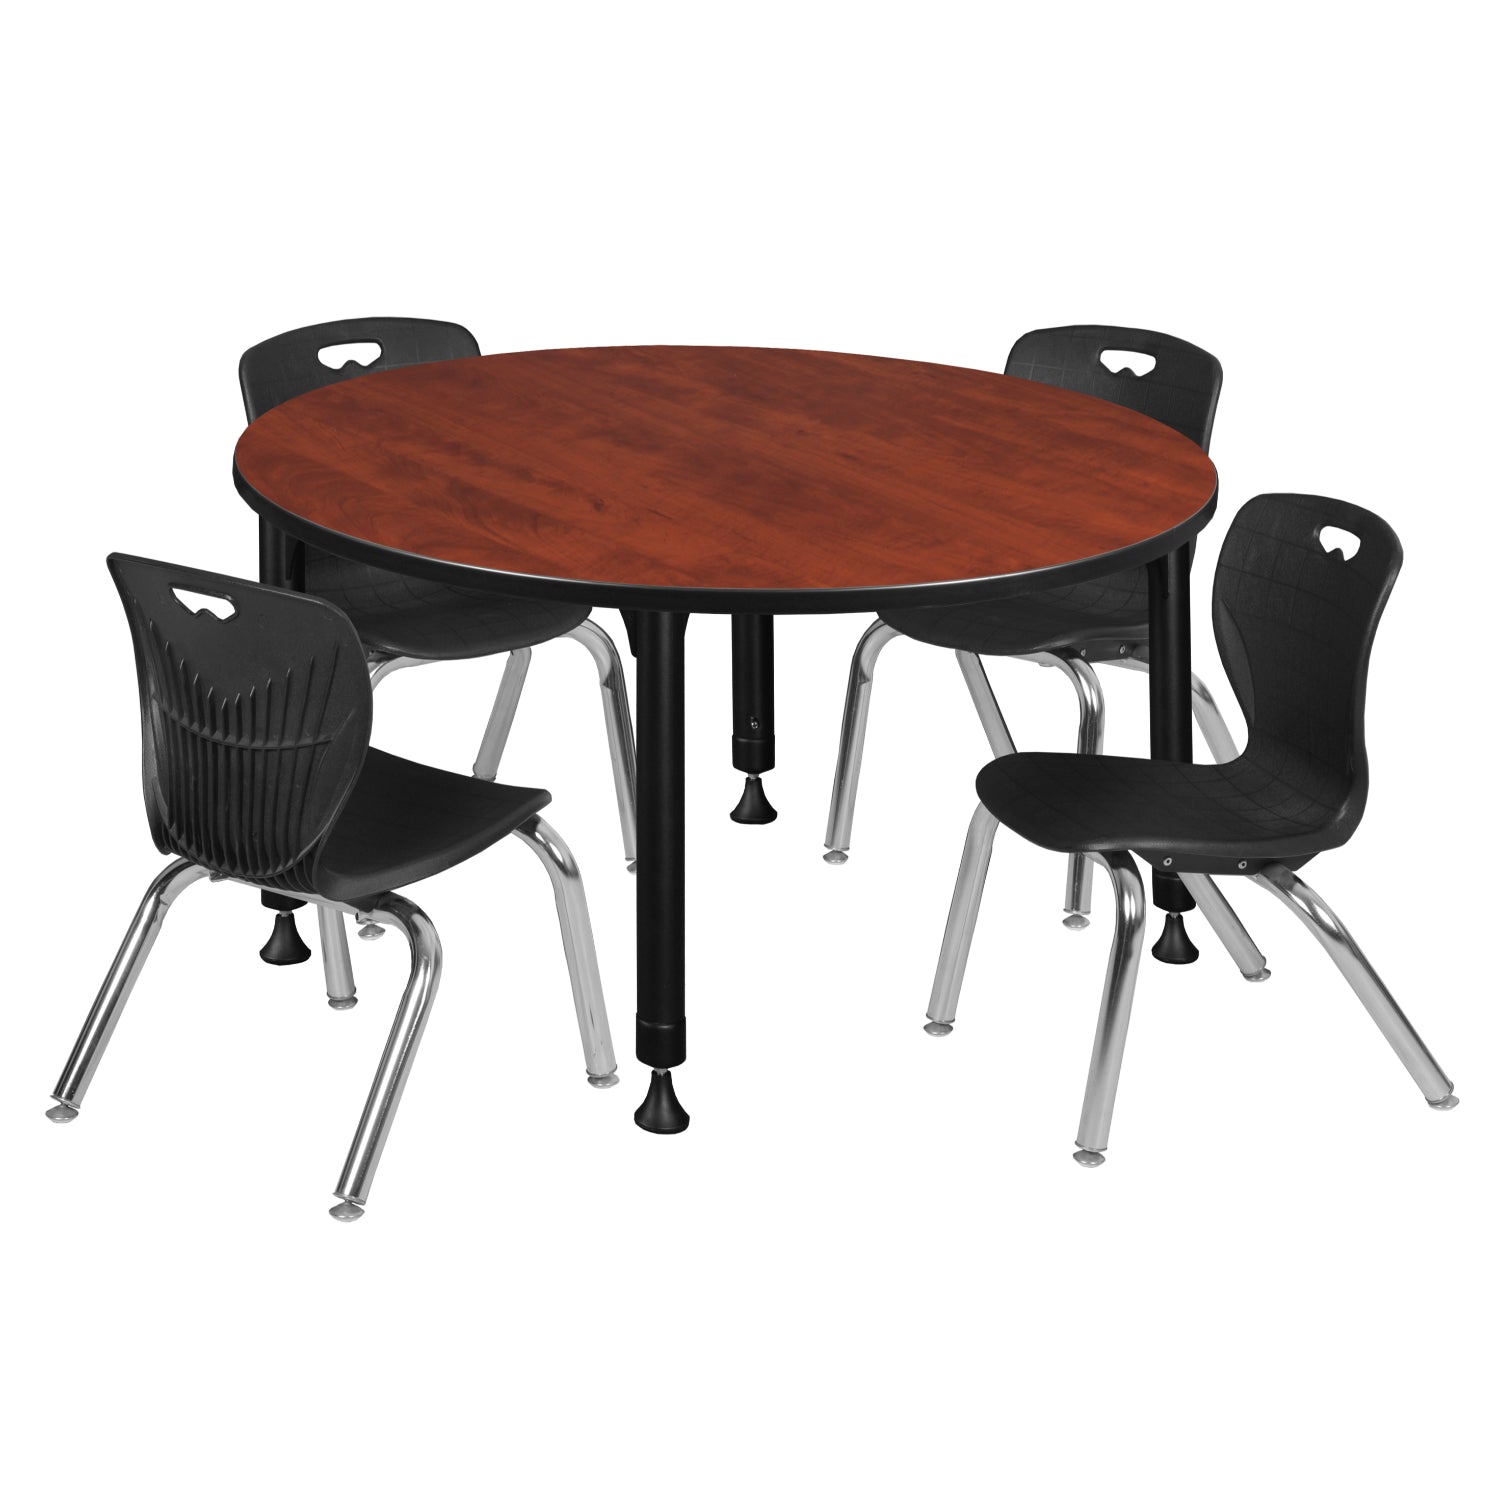 Kee Classroom Table and Chair Package, Kee 48" Round Adjustable Height Table with 4 Andy 12" Stack Chairs